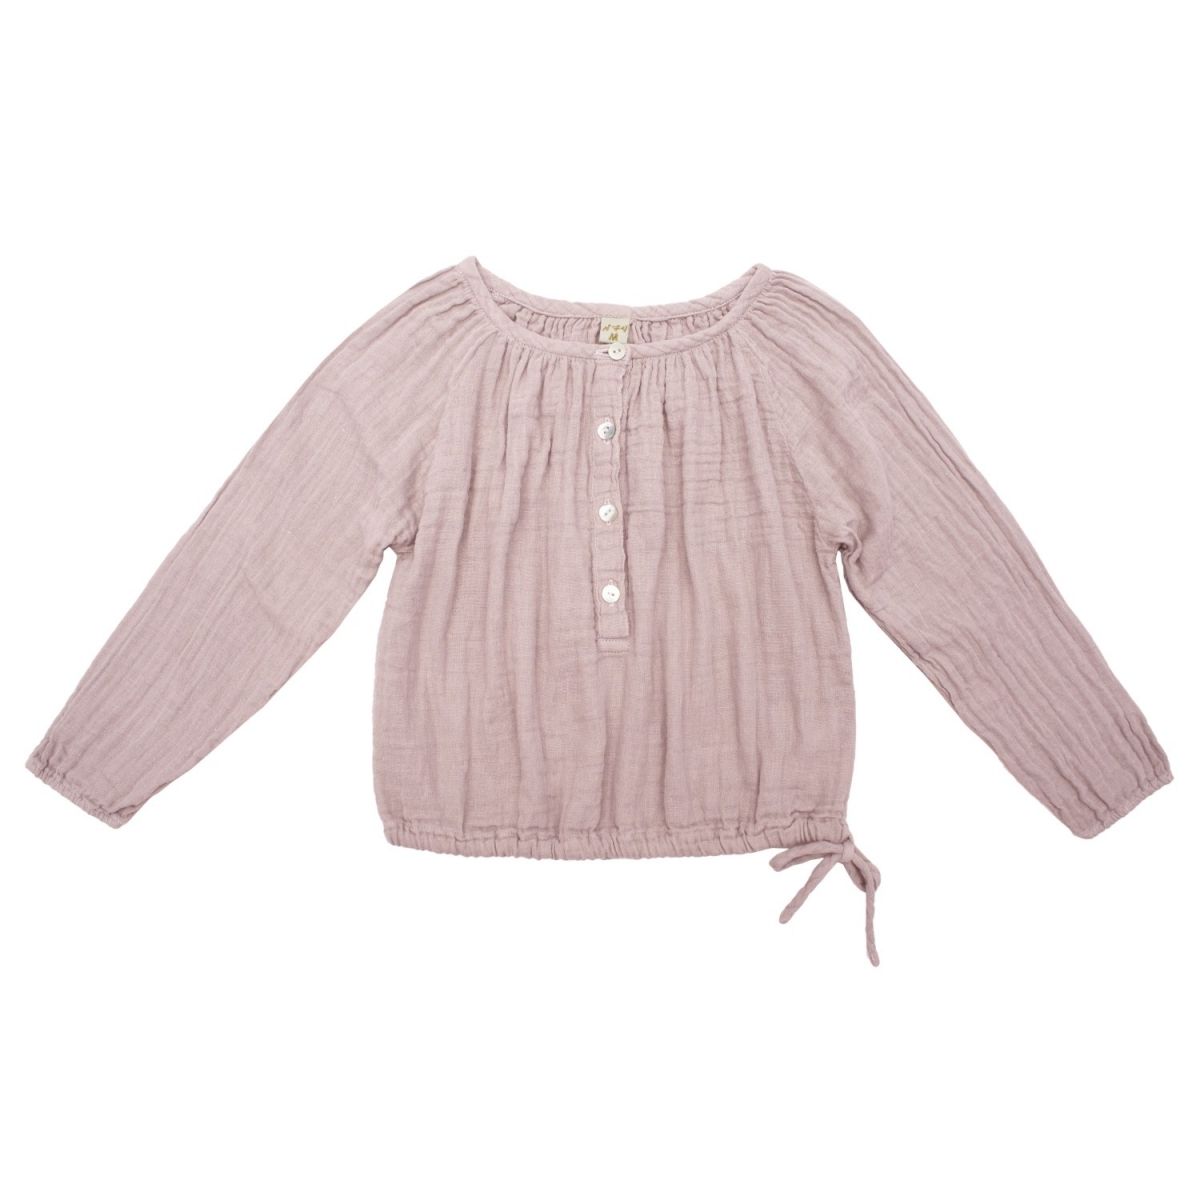 Numero 74 - Shirt Naia dusty pink - Chemisiers et T-shirts - 